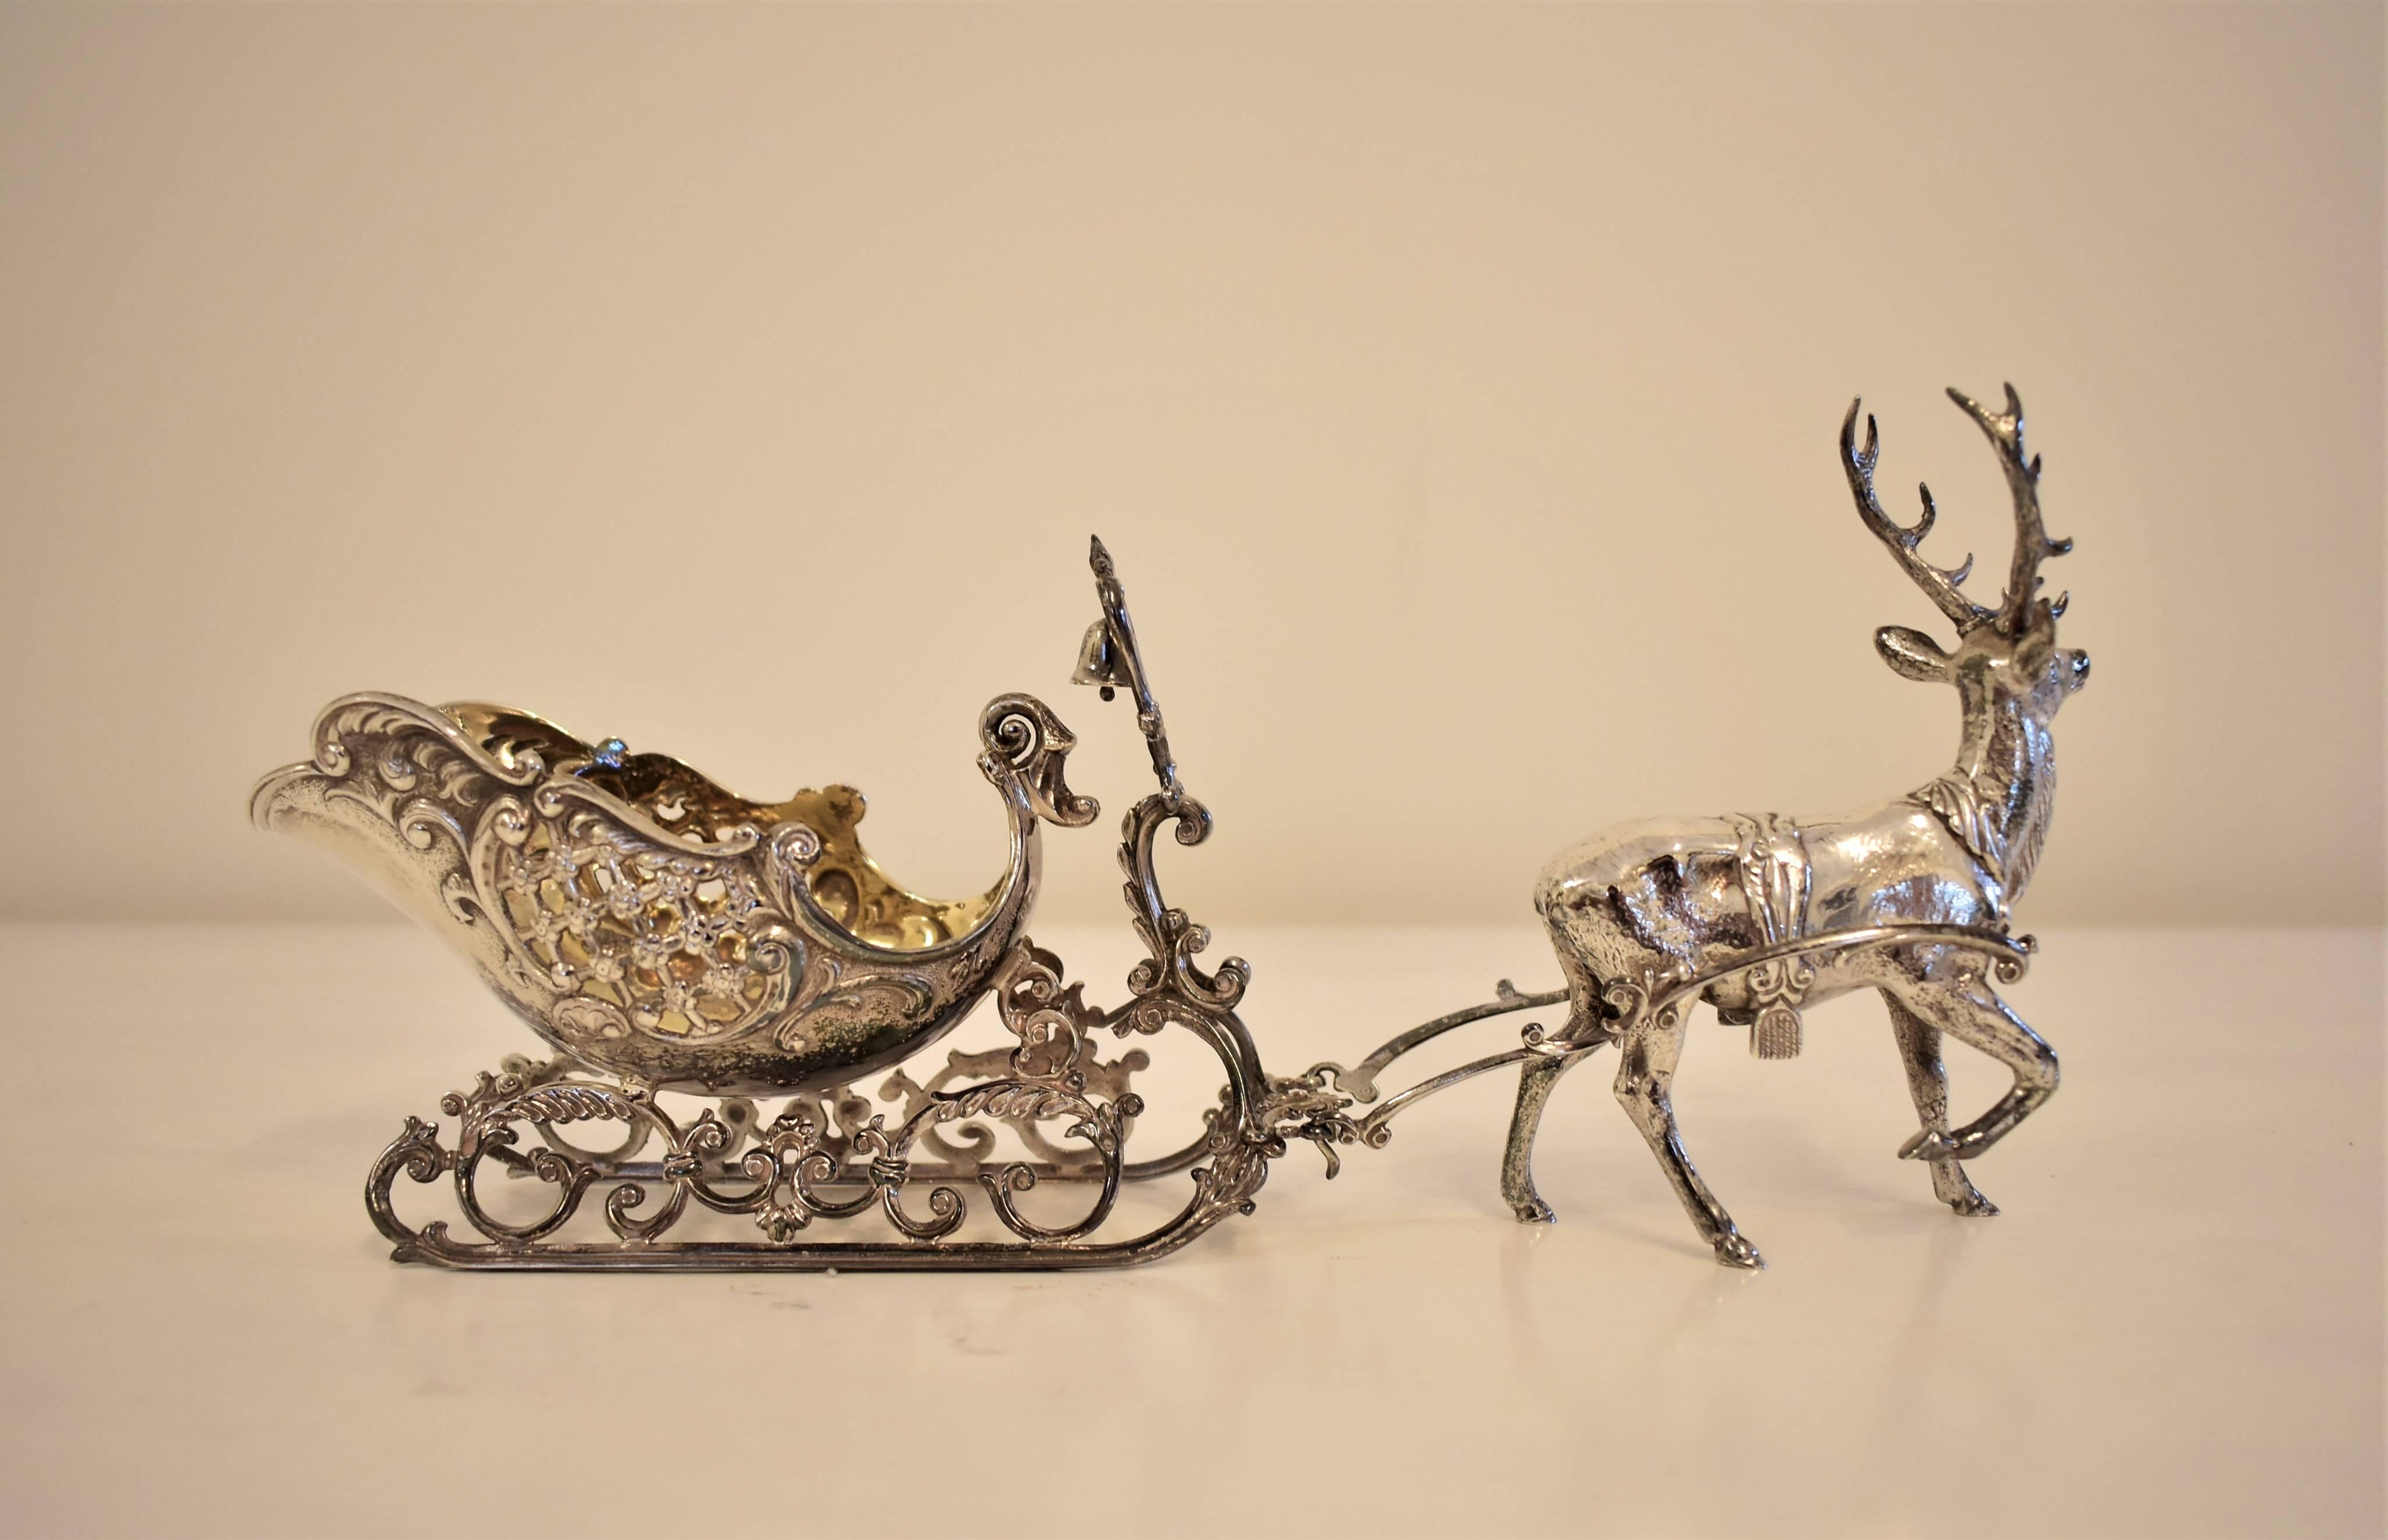 A delicate detailed silver sledge or sleigh complete with functioning bell drawn by a reindeer in walking pose. The interior of the sleigh is gilded. Intricately detailed and ornate with finely hand chased finishing’s to give very realistic feel.